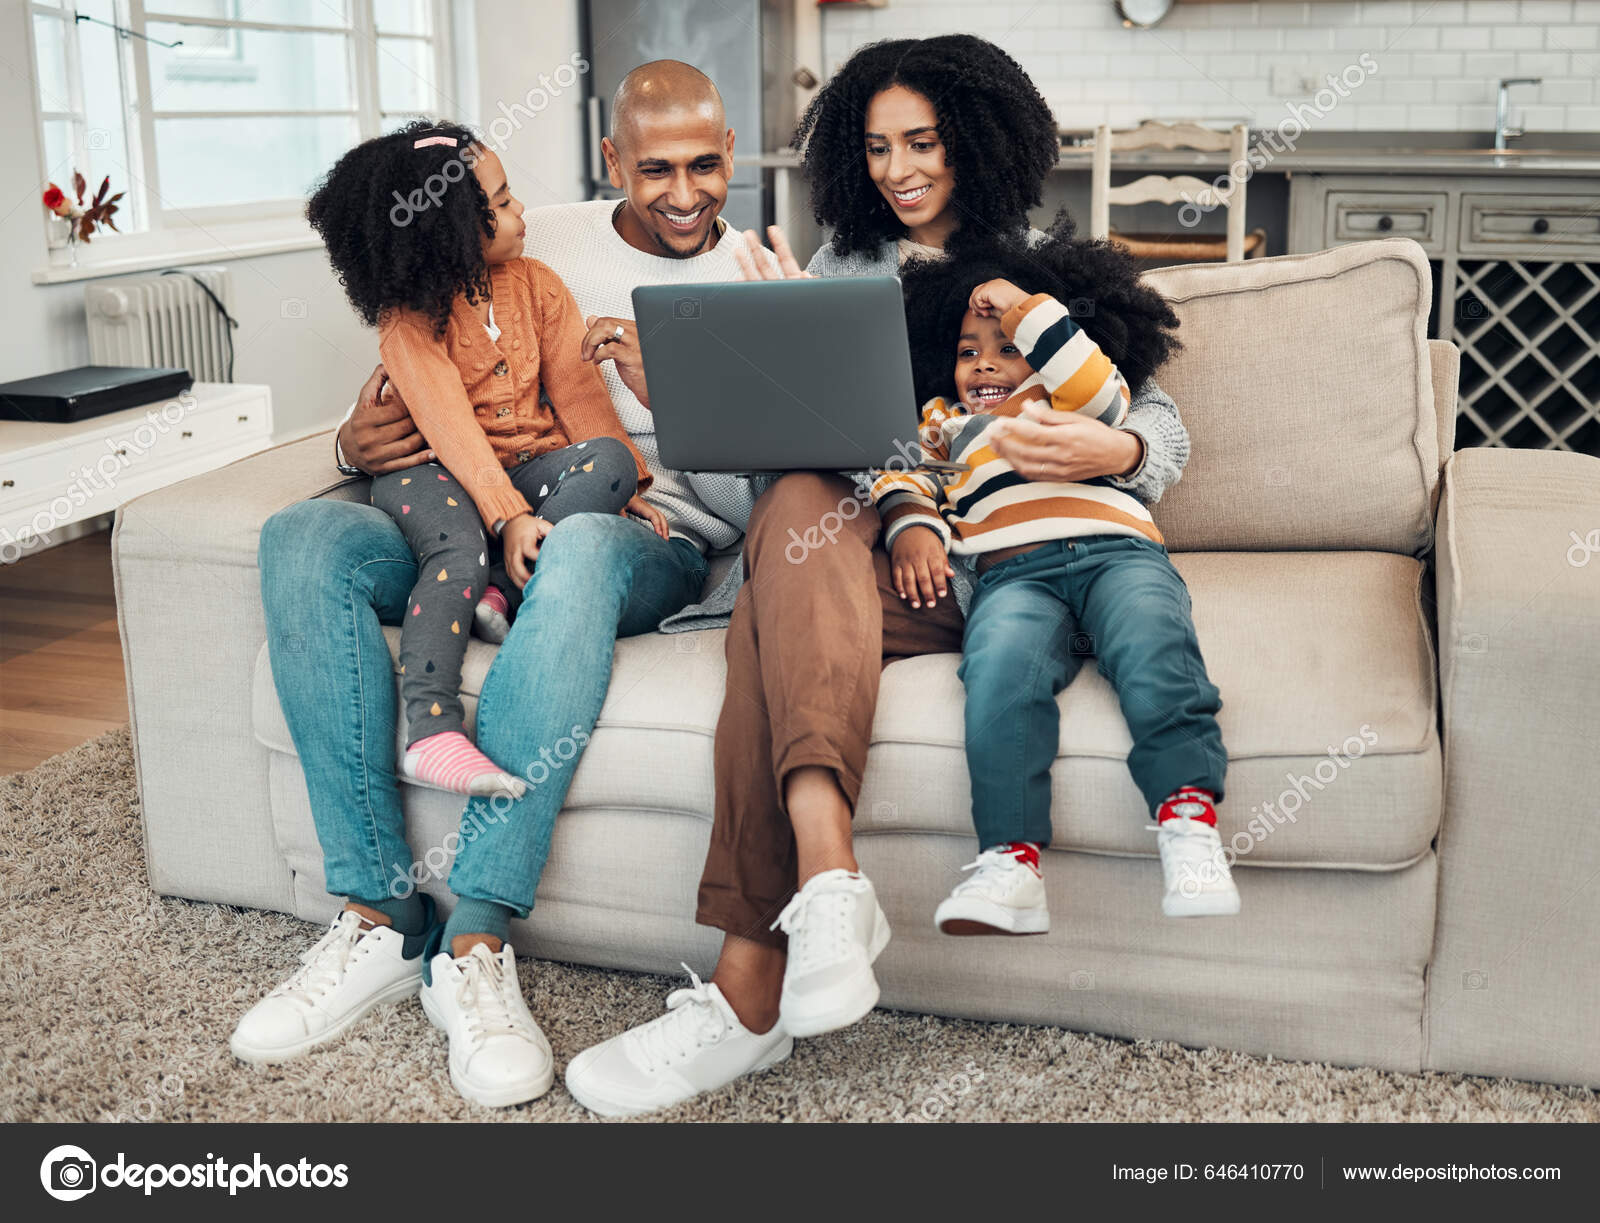 Happy Family Laptop Kids Sofa Video Comedy Movie Streaming Internet Stock Photo by ©PeopleImages 646410770